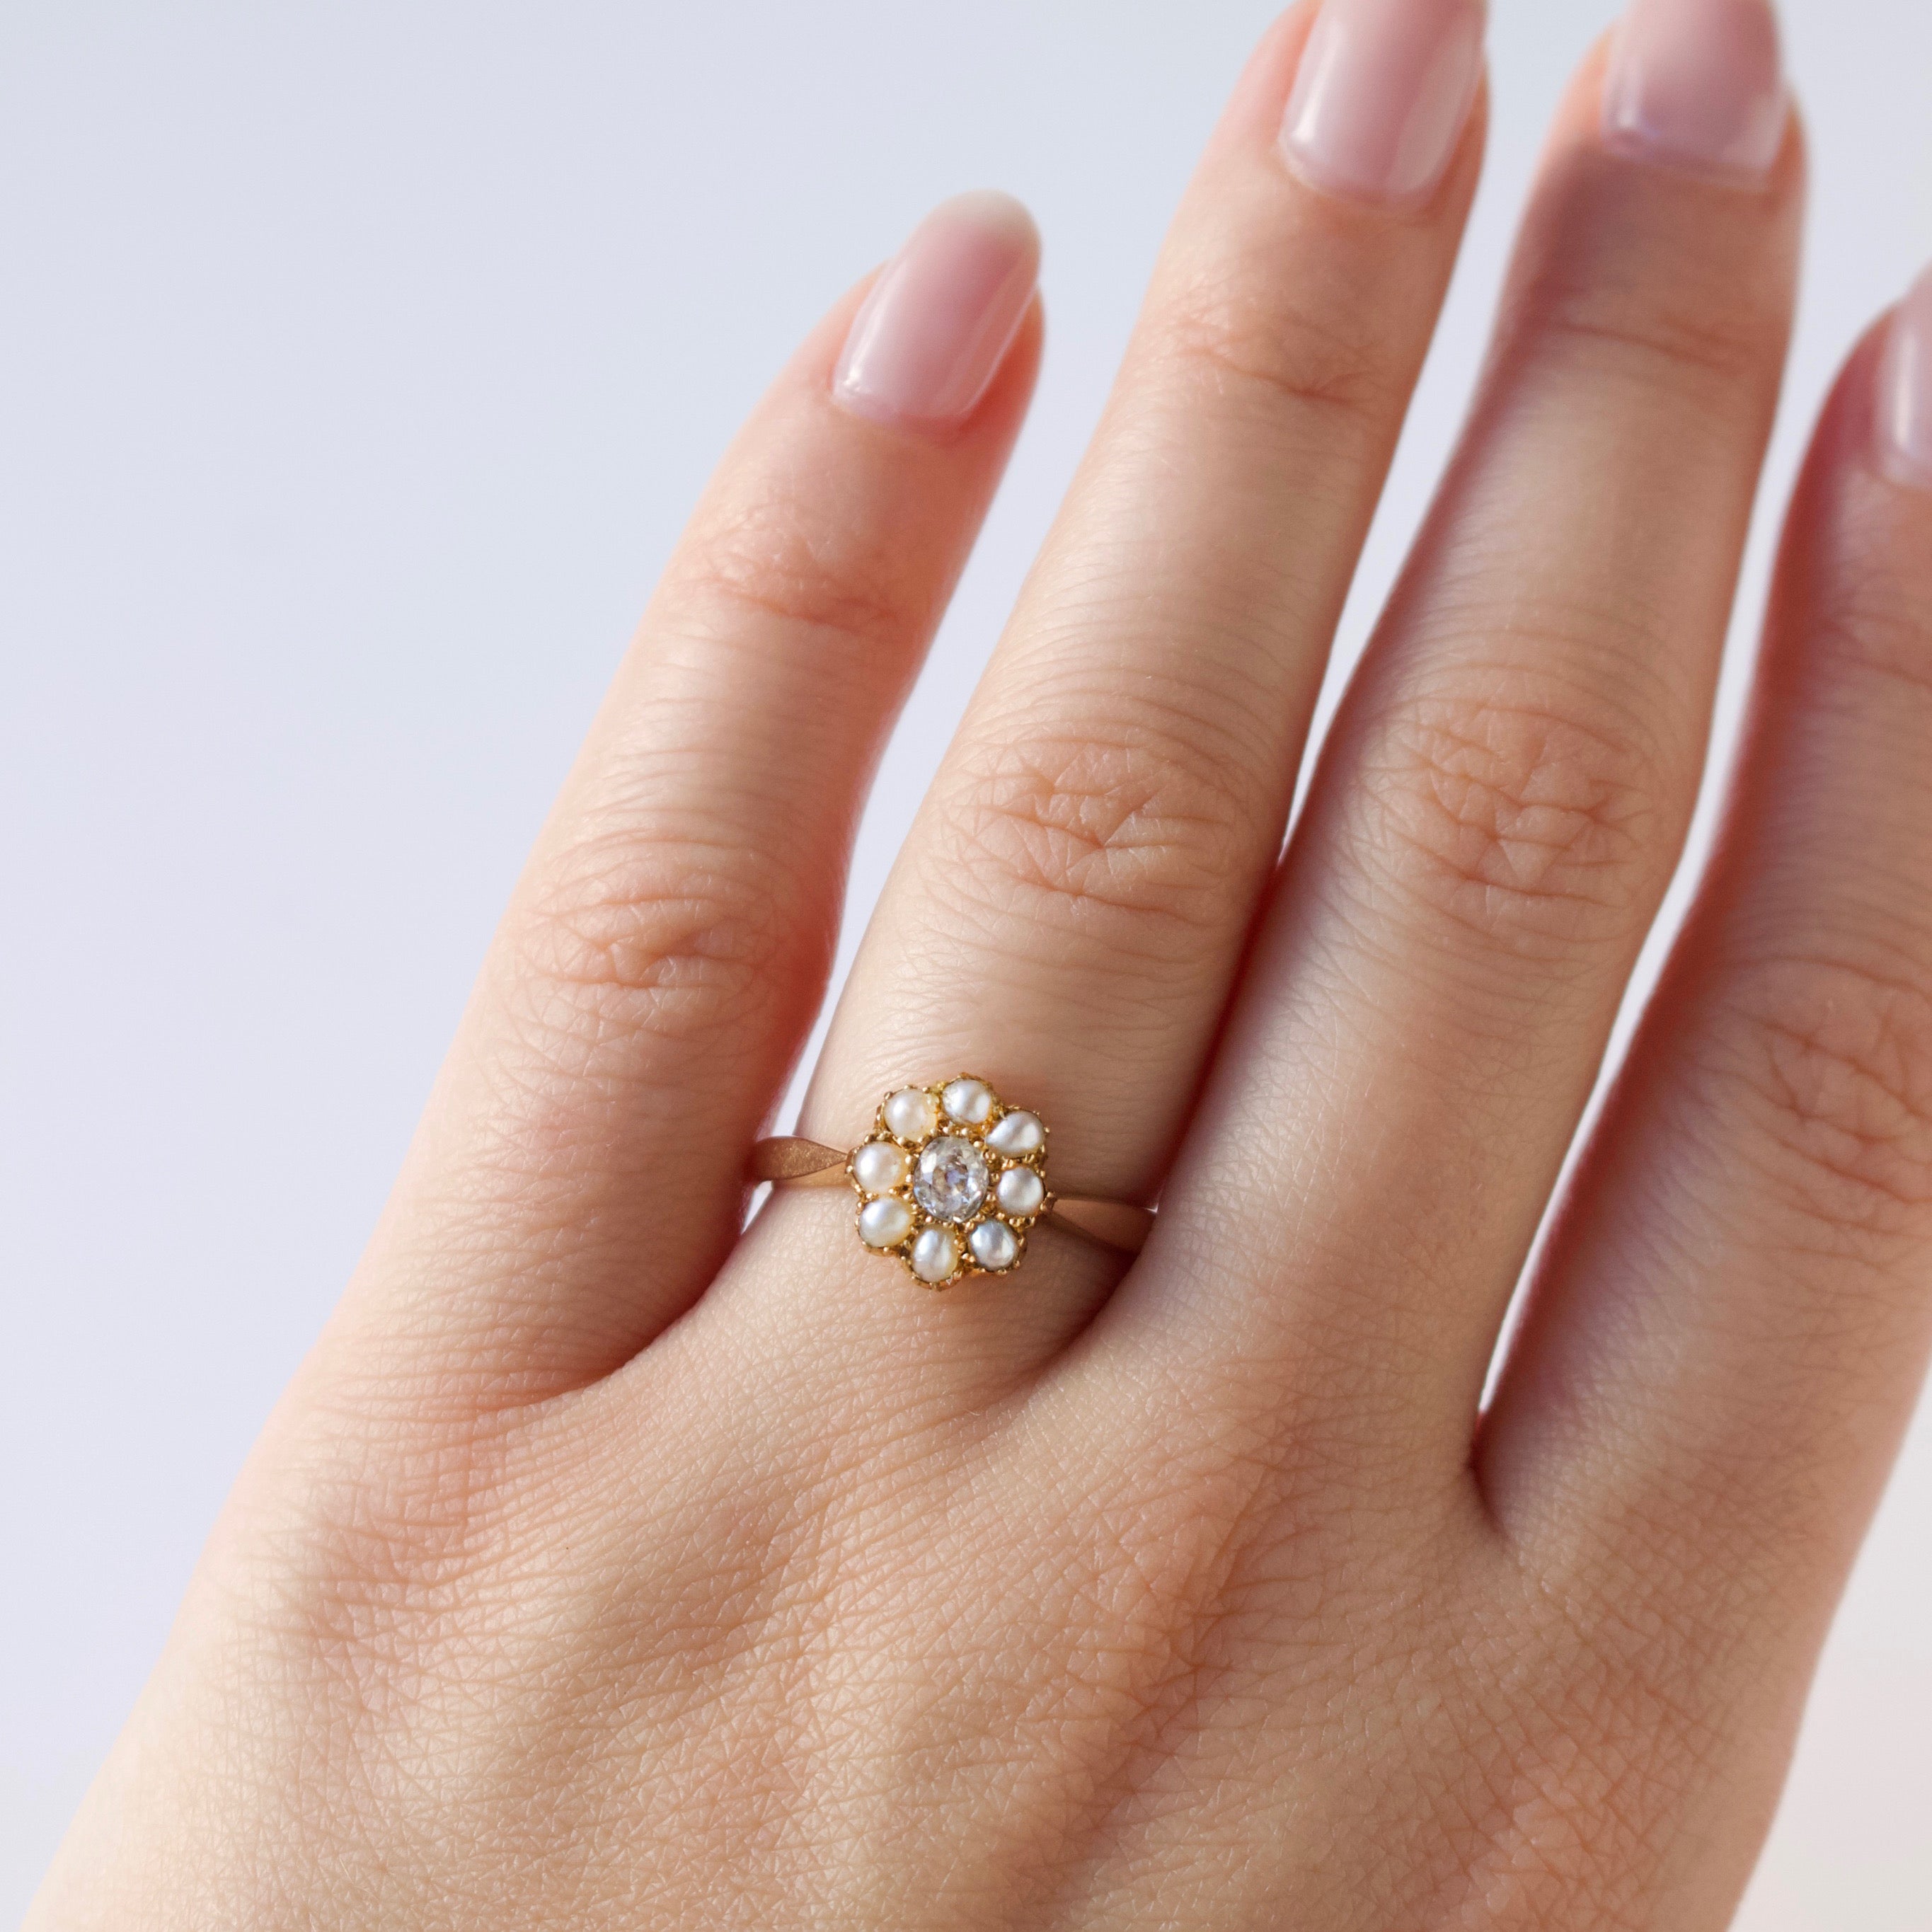 pearl and diamond vintage ring